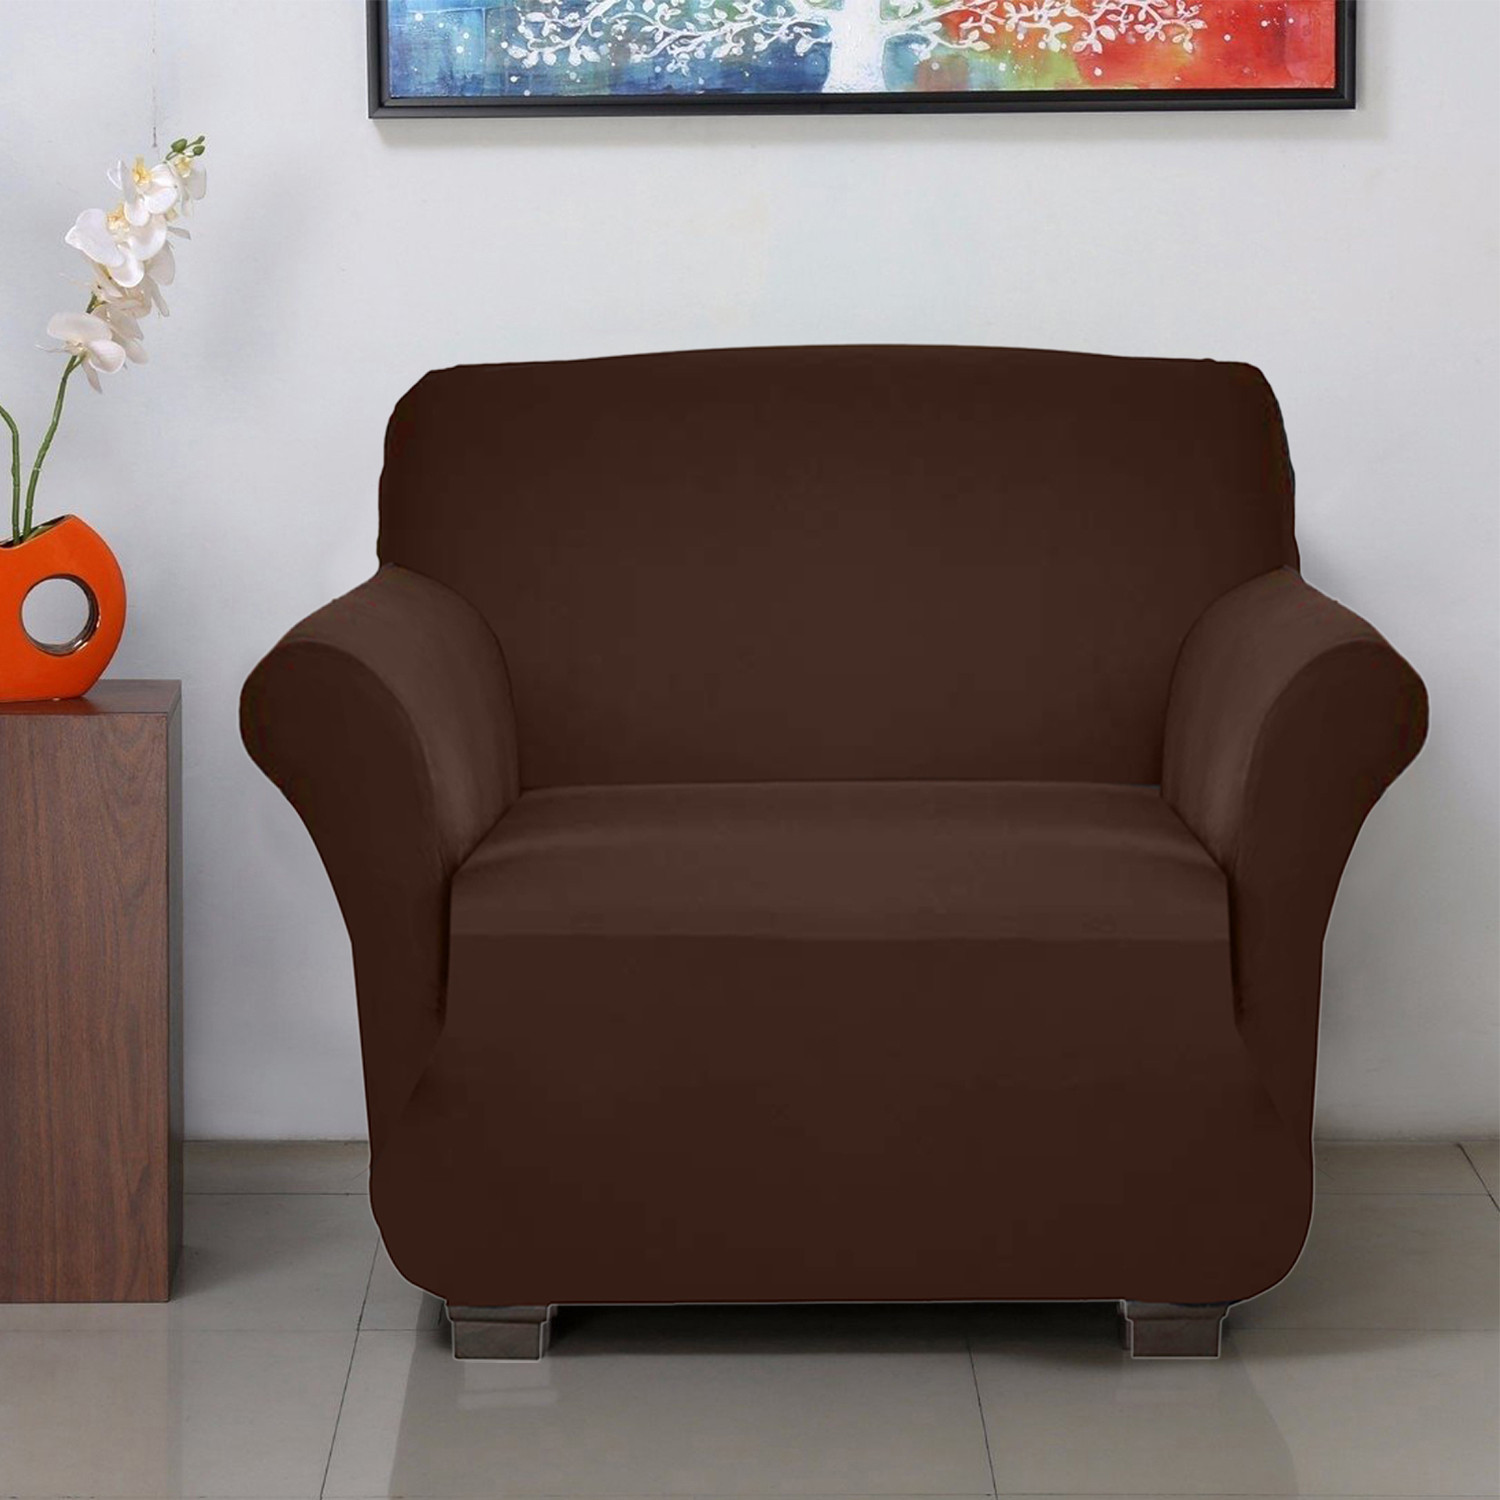 Kuber Industries Stretchable, Non-Slip Polyster 1 Seater Sofa & Chair Cover Set, Set of 2 (Brown)